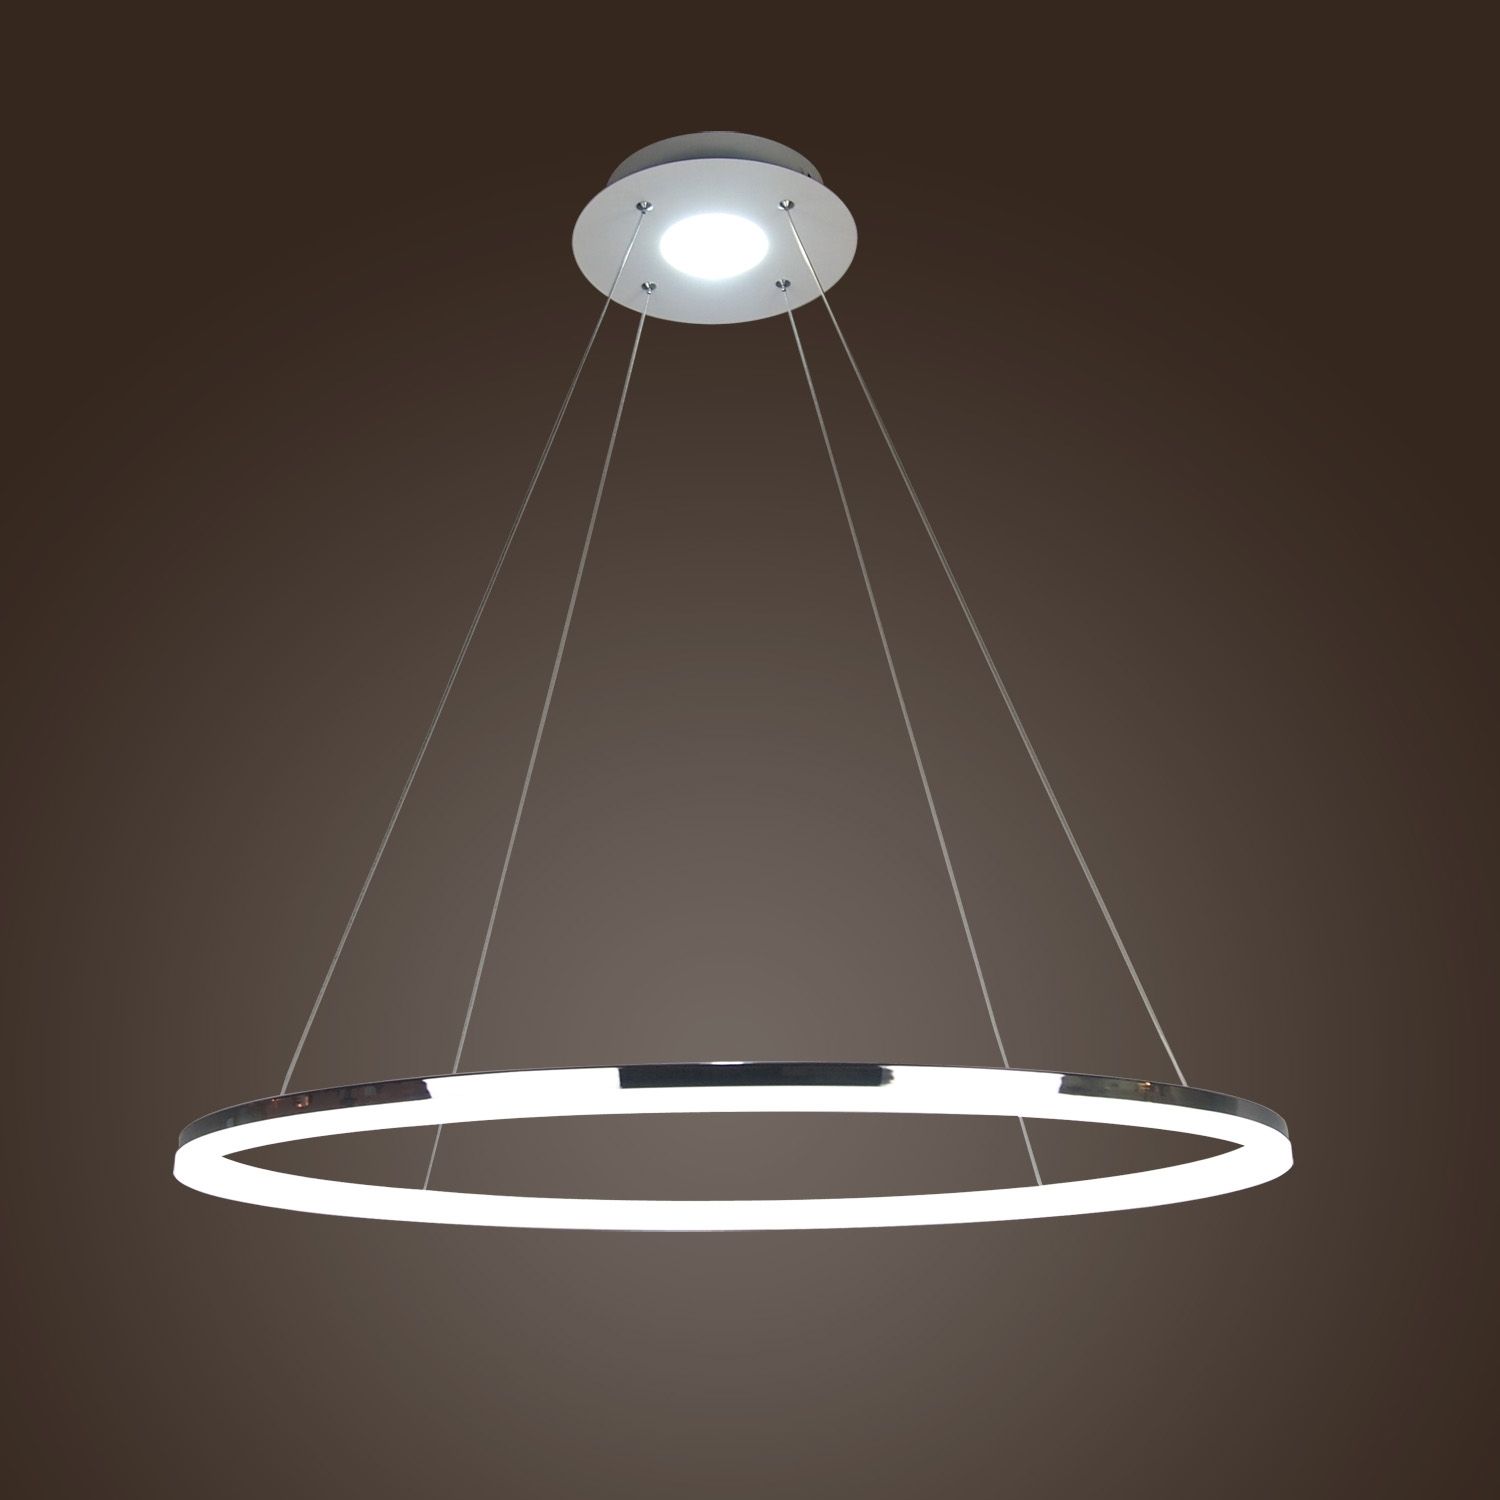 Decorating : Outdoor Ceiling Light For Boats Led 00599wh Aaa World For Outdoor Ceiling Lights At Ebay (View 7 of 15)